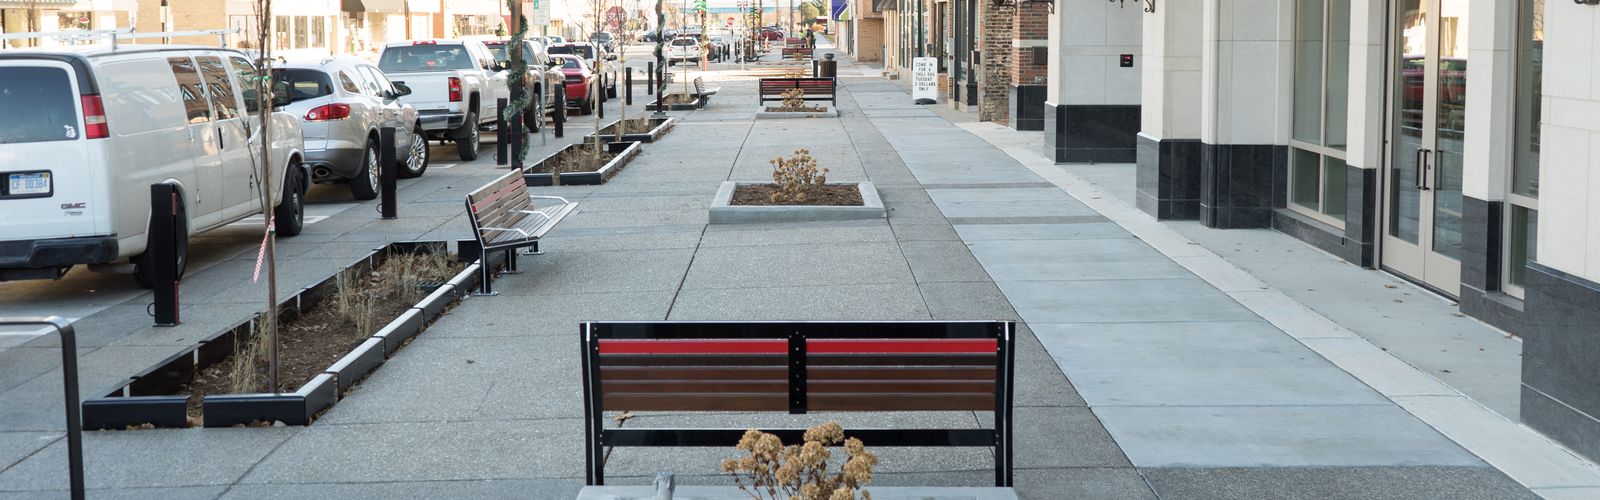 Downtown Midland's new streetscape